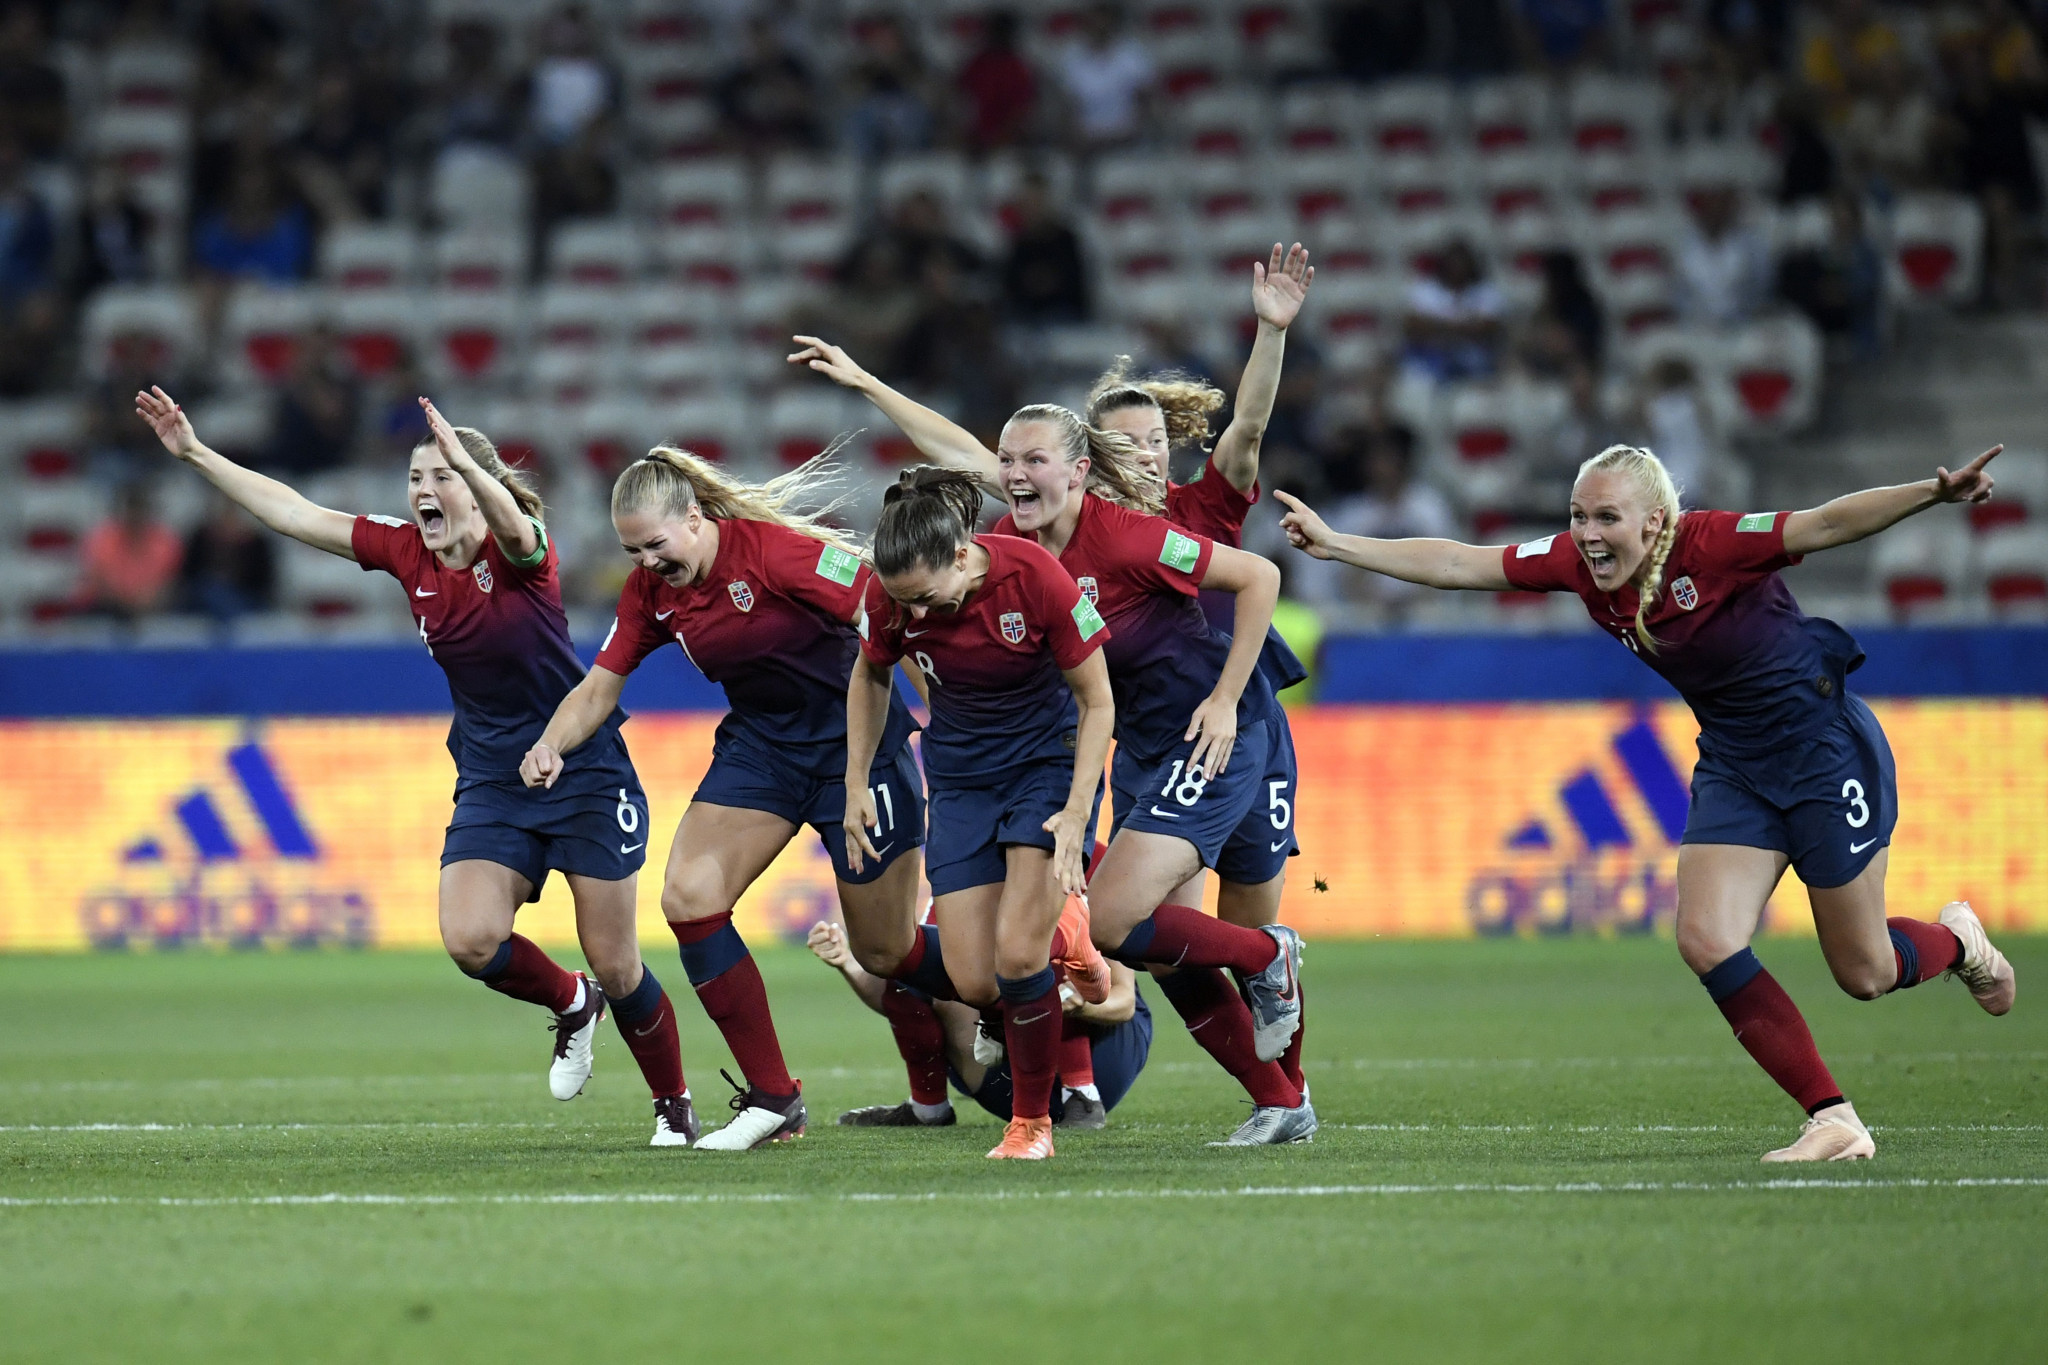 FIFA claim global interest in Women's World Cup sets a new high with records for TV audiences and social media engagement